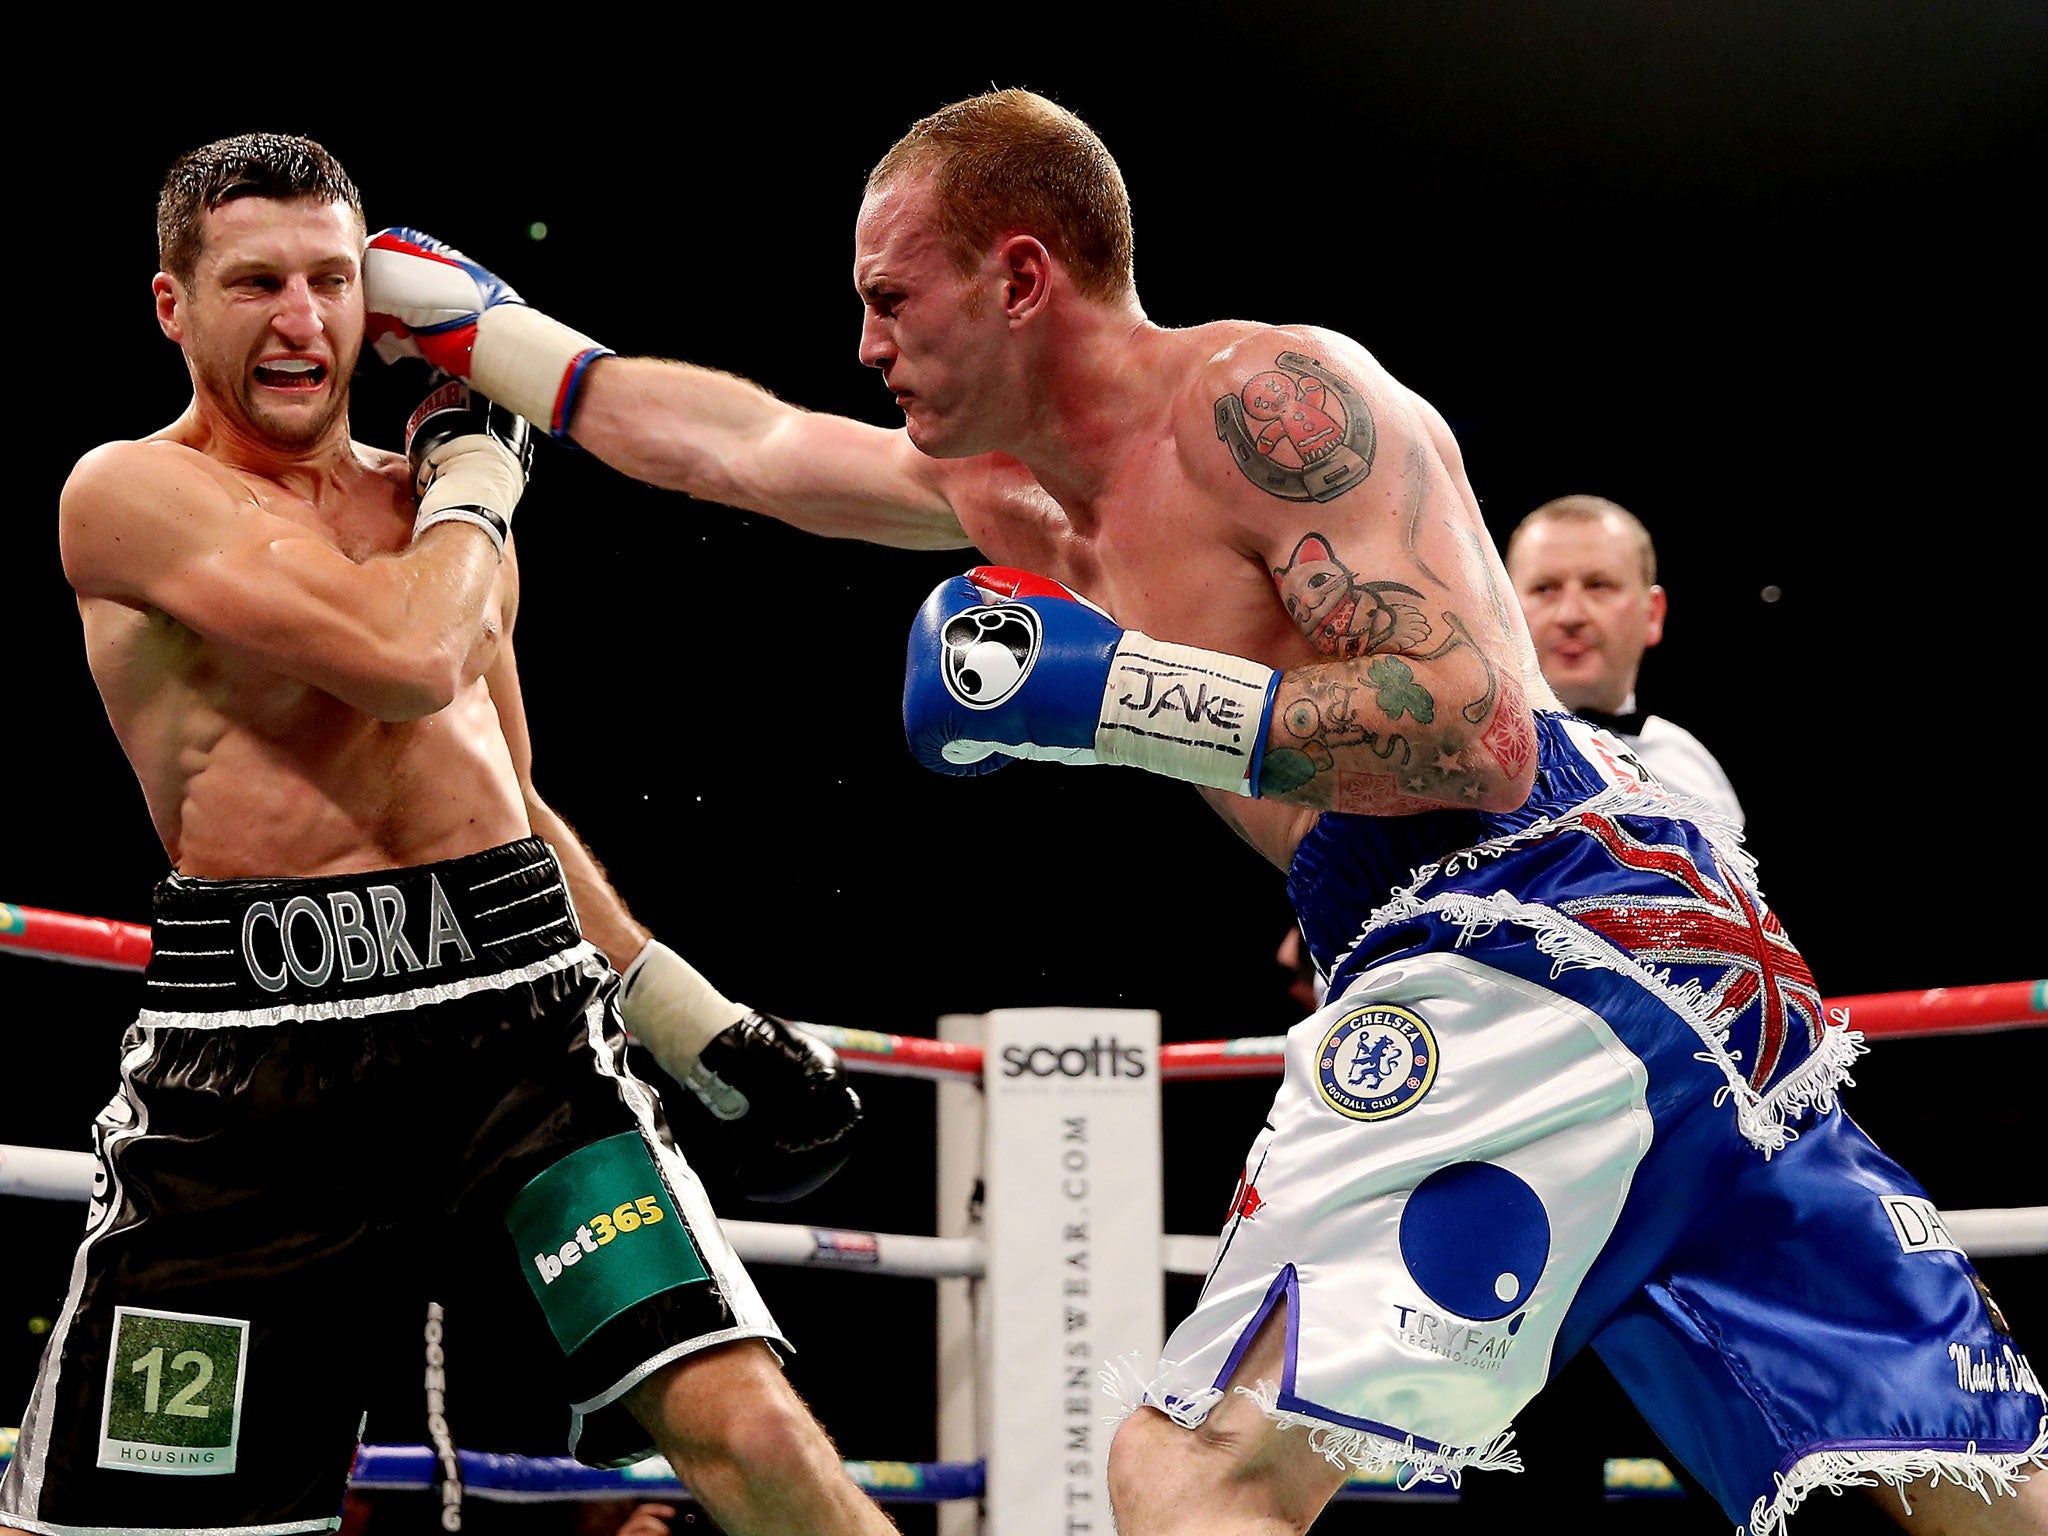 Carl Froch (L) in action with George Groves